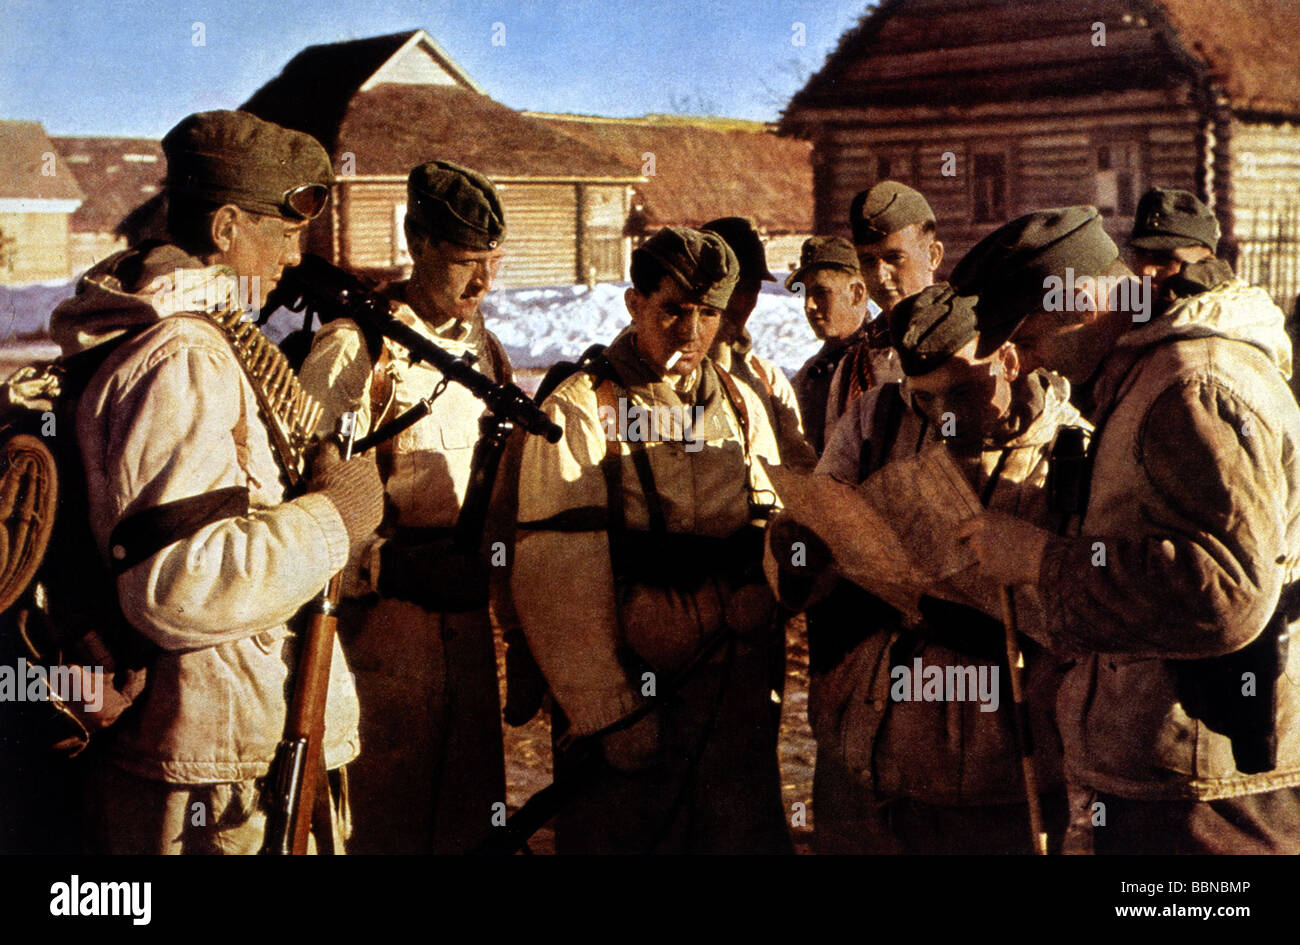 events, Second World War / WWII, Russia 1942 / 1943, Wehrmacht raiding party in winter clothes during a briefing, circa 1942, Stock Photo